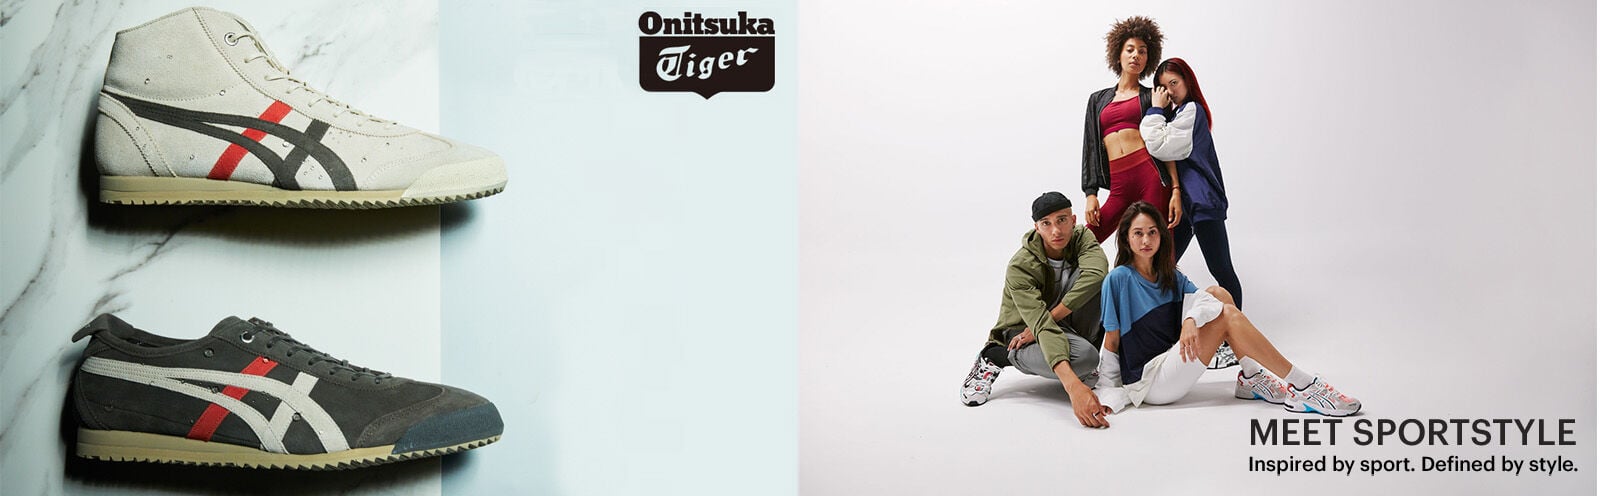 Are you looking for Onitsuka Tiger or Asics Tiger? | ASICS IT